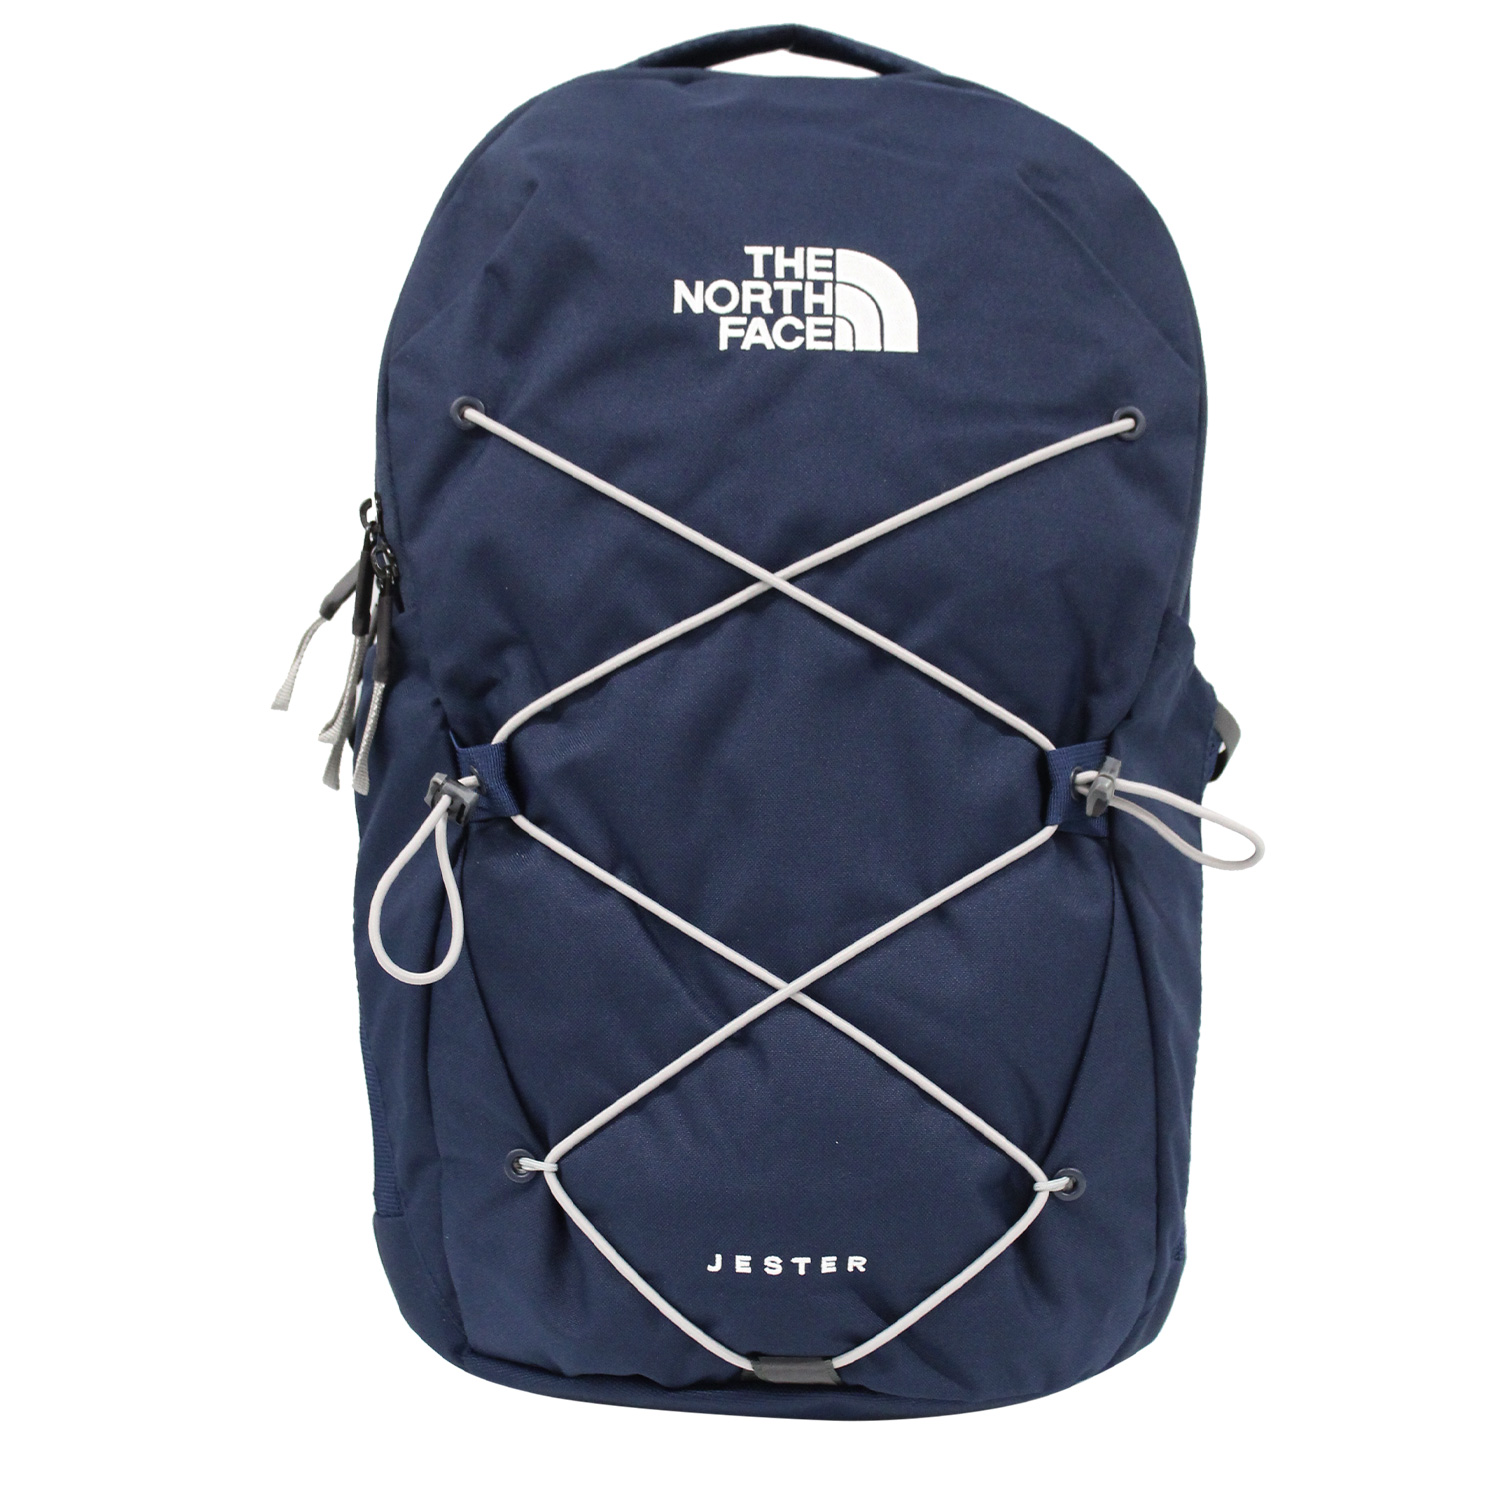 THE NORTH FACE ザ ノースフェイス JESTER ジェスター バックパック リュック リュックサック 28L A3 メンズ レディース  NF0A3VXF プレゼント 送料無料